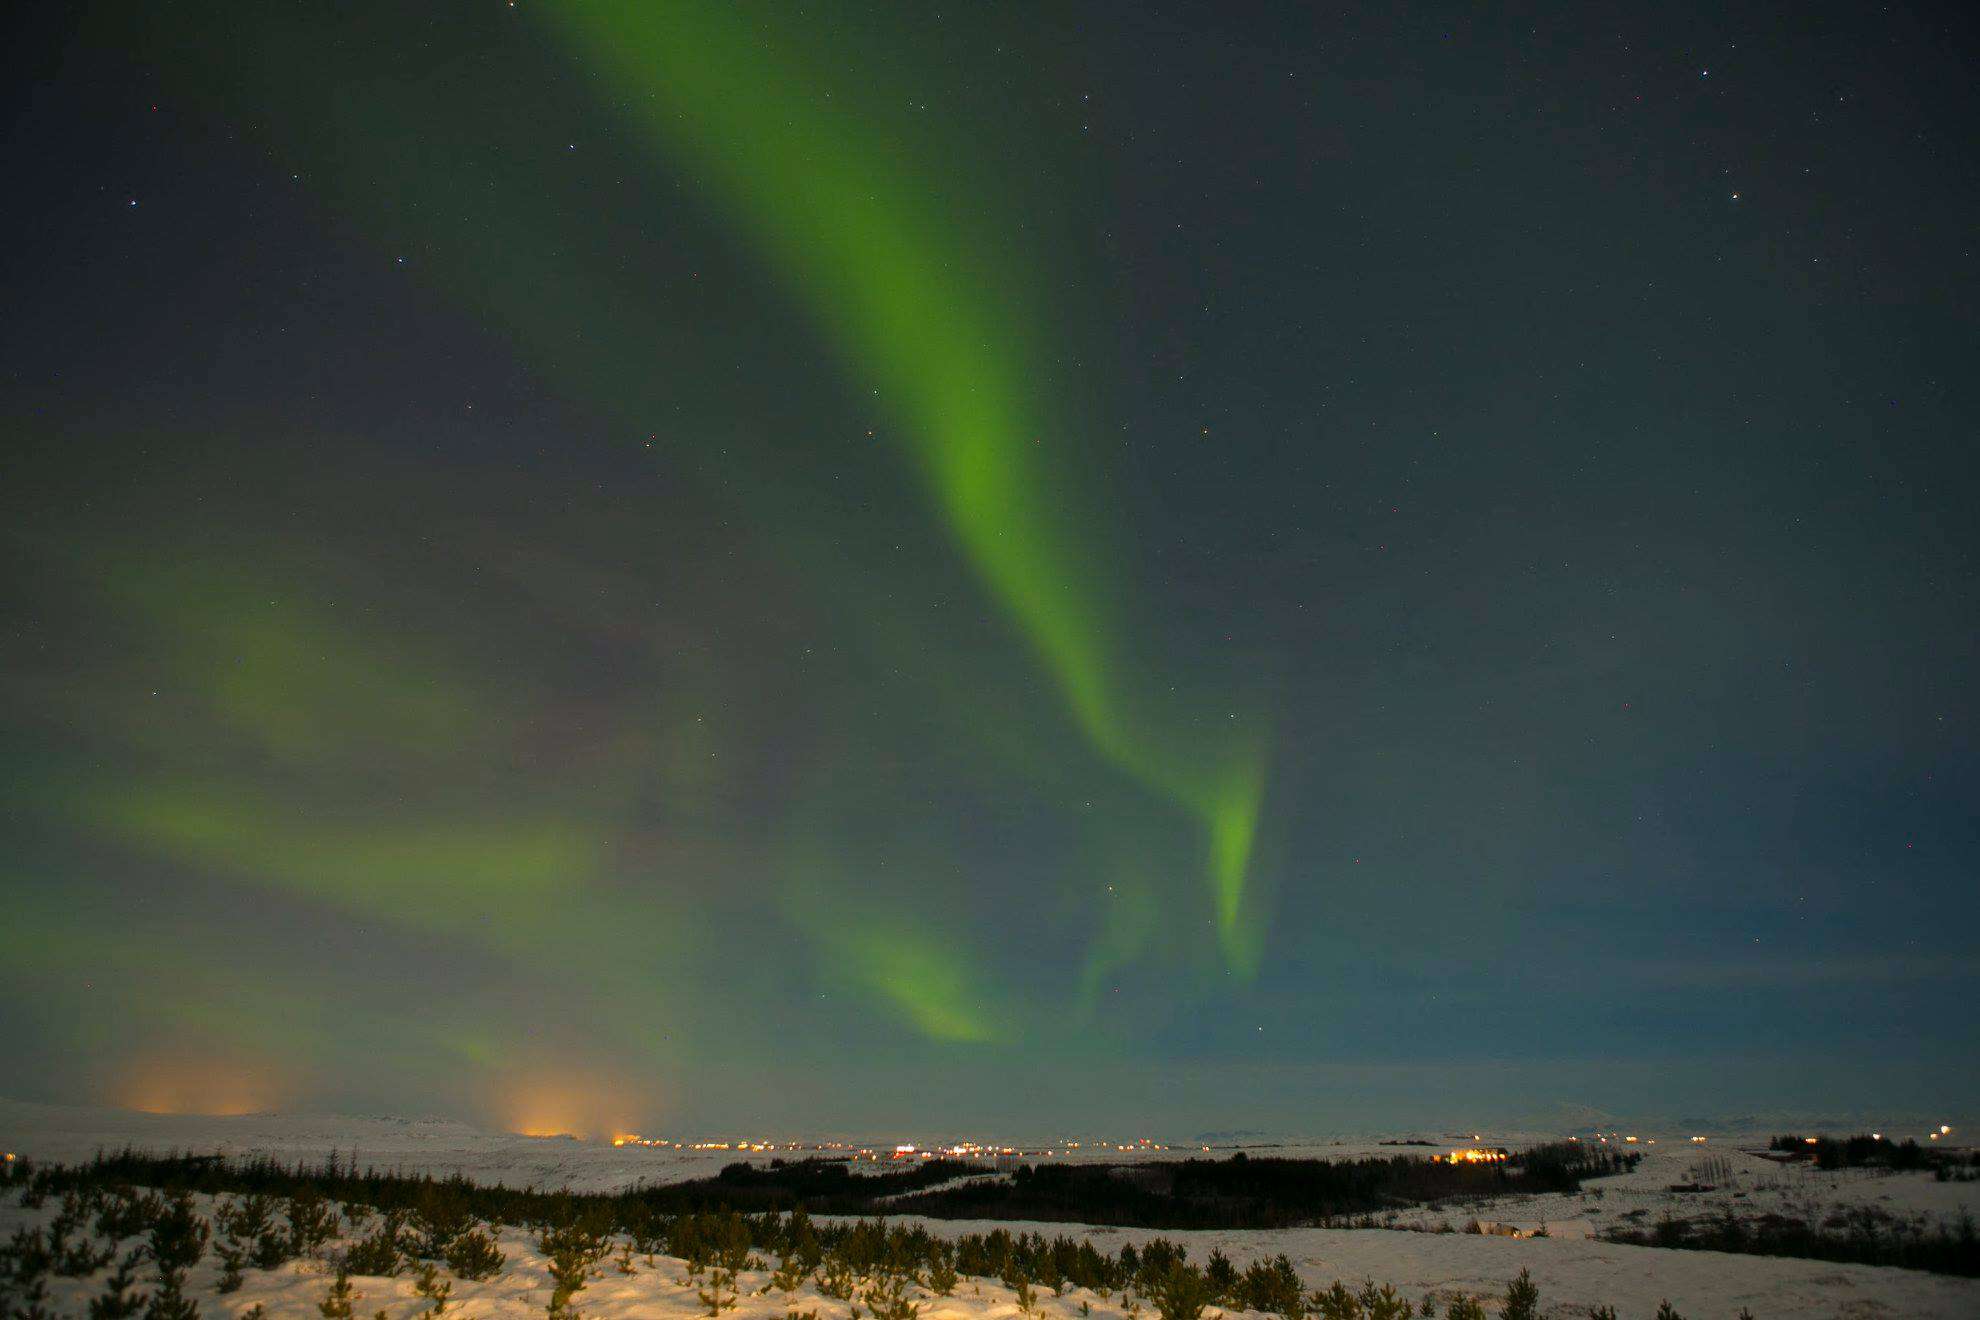  The Northern Lights (Aurora Borealis) illuminate the night sky with a vibrant display of green ribbons above a snowy landscape. The scene is dotted with small lights from a distant settlement, and the stars are visible in the dark sky above.